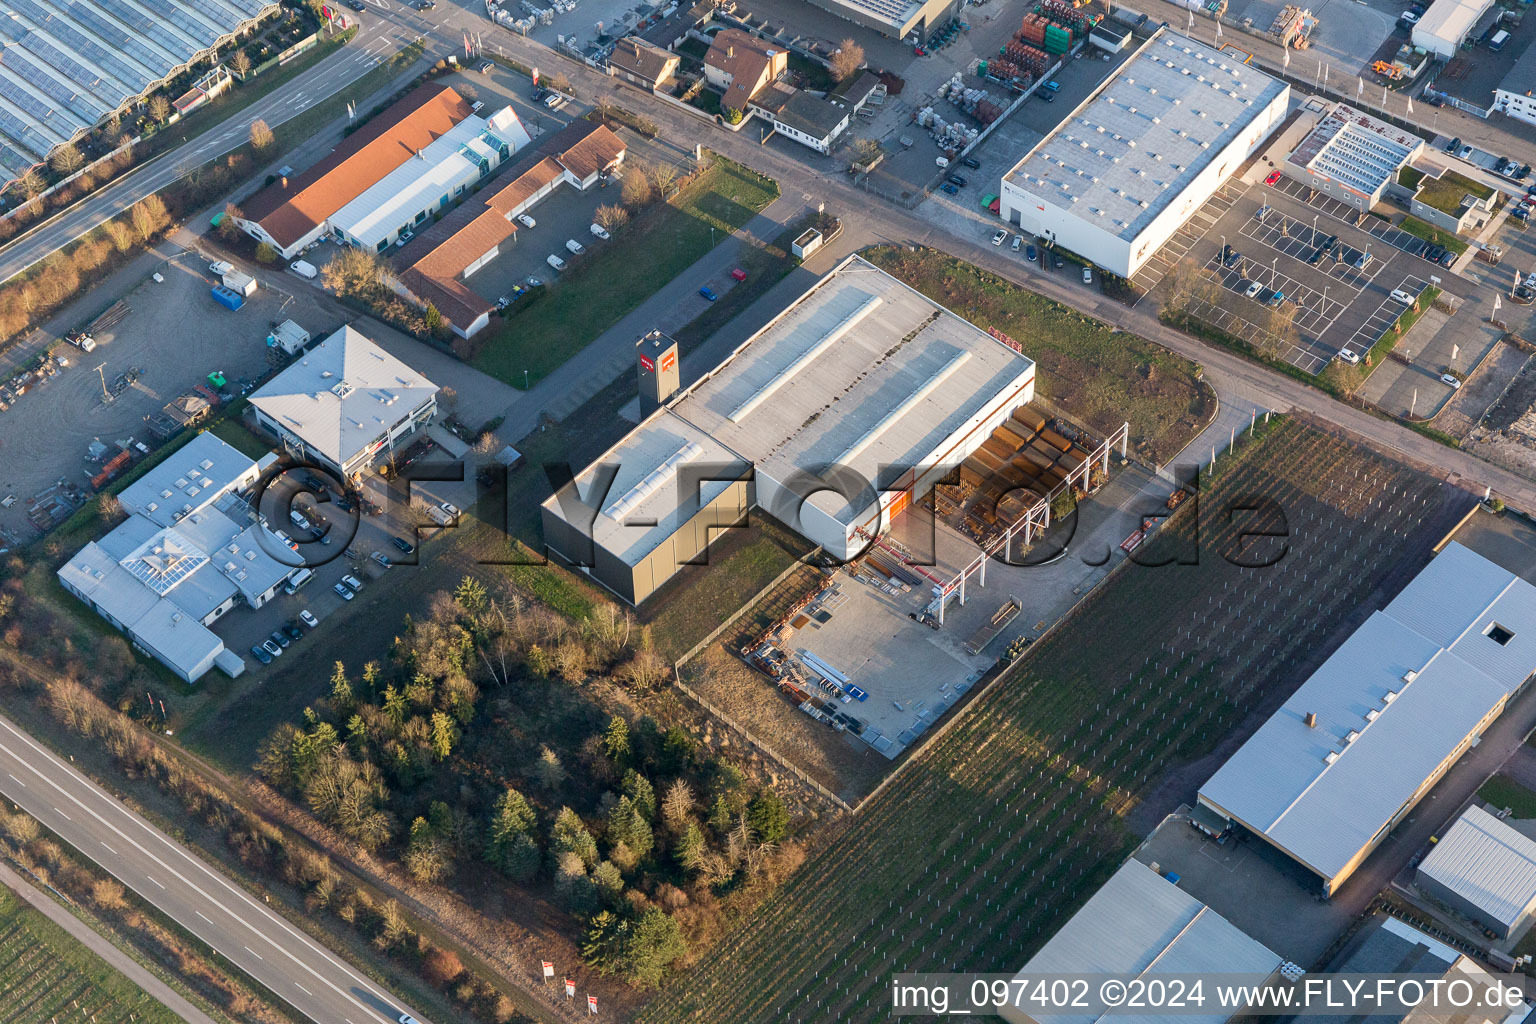 Drone image of North industrial area in Landau in der Pfalz in the state Rhineland-Palatinate, Germany